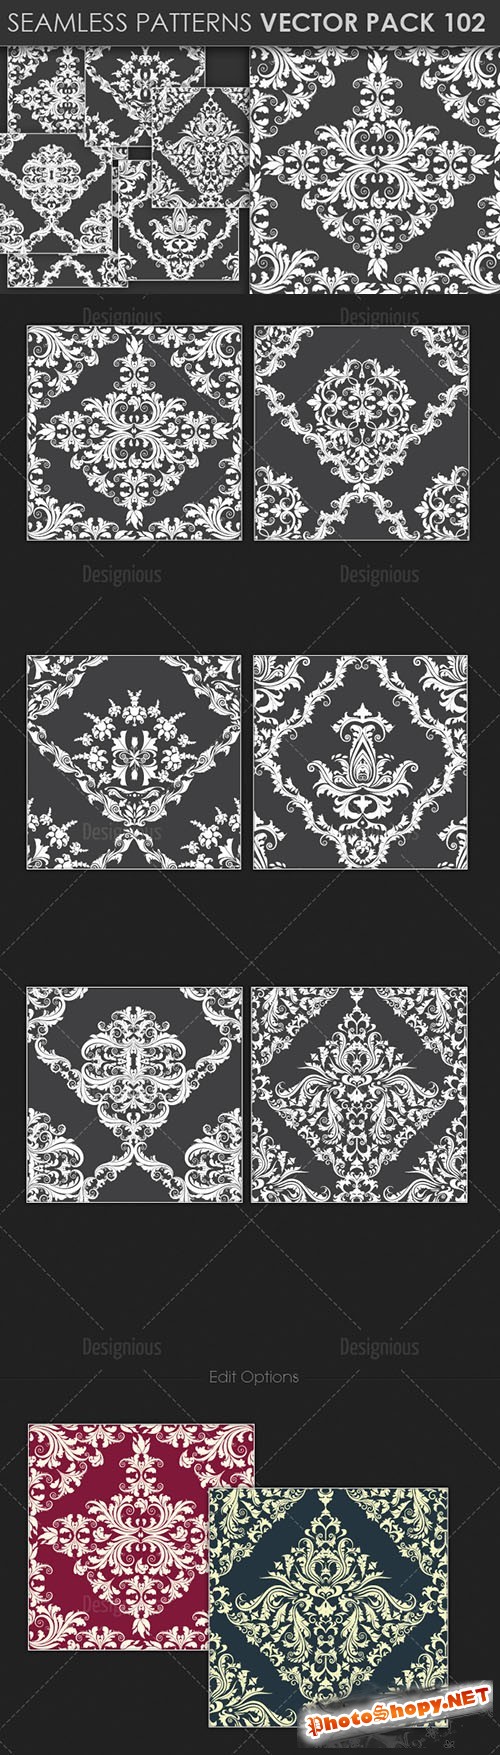 Seamless Patterns Vector Pack 102